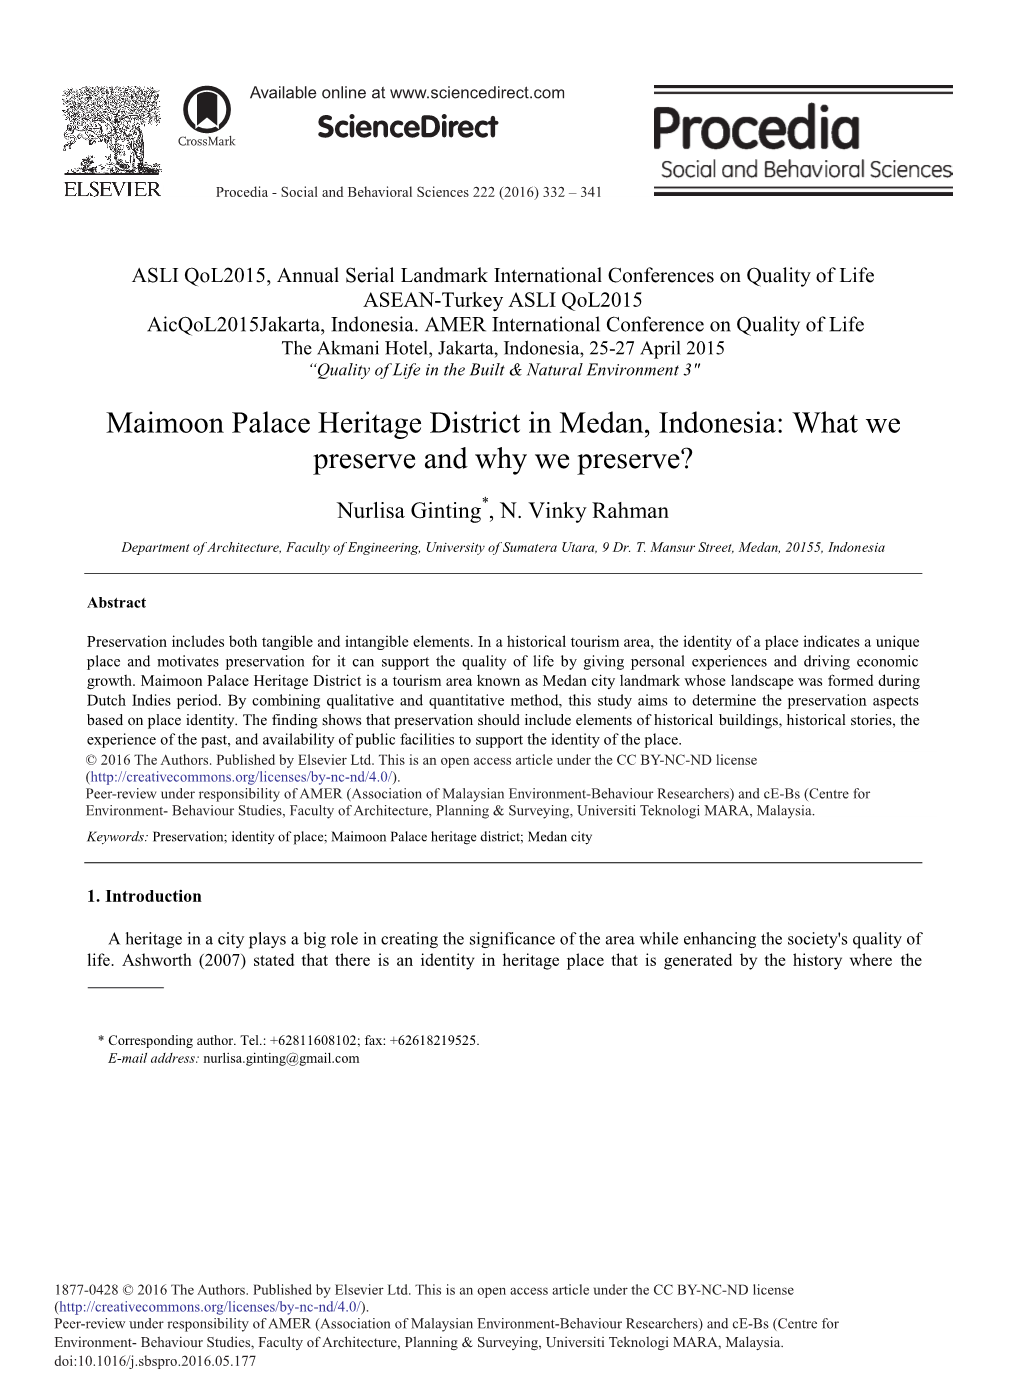 Maimoon Palace Heritage District in Medan, Indonesia: What We Preserve and Why We Preserve?